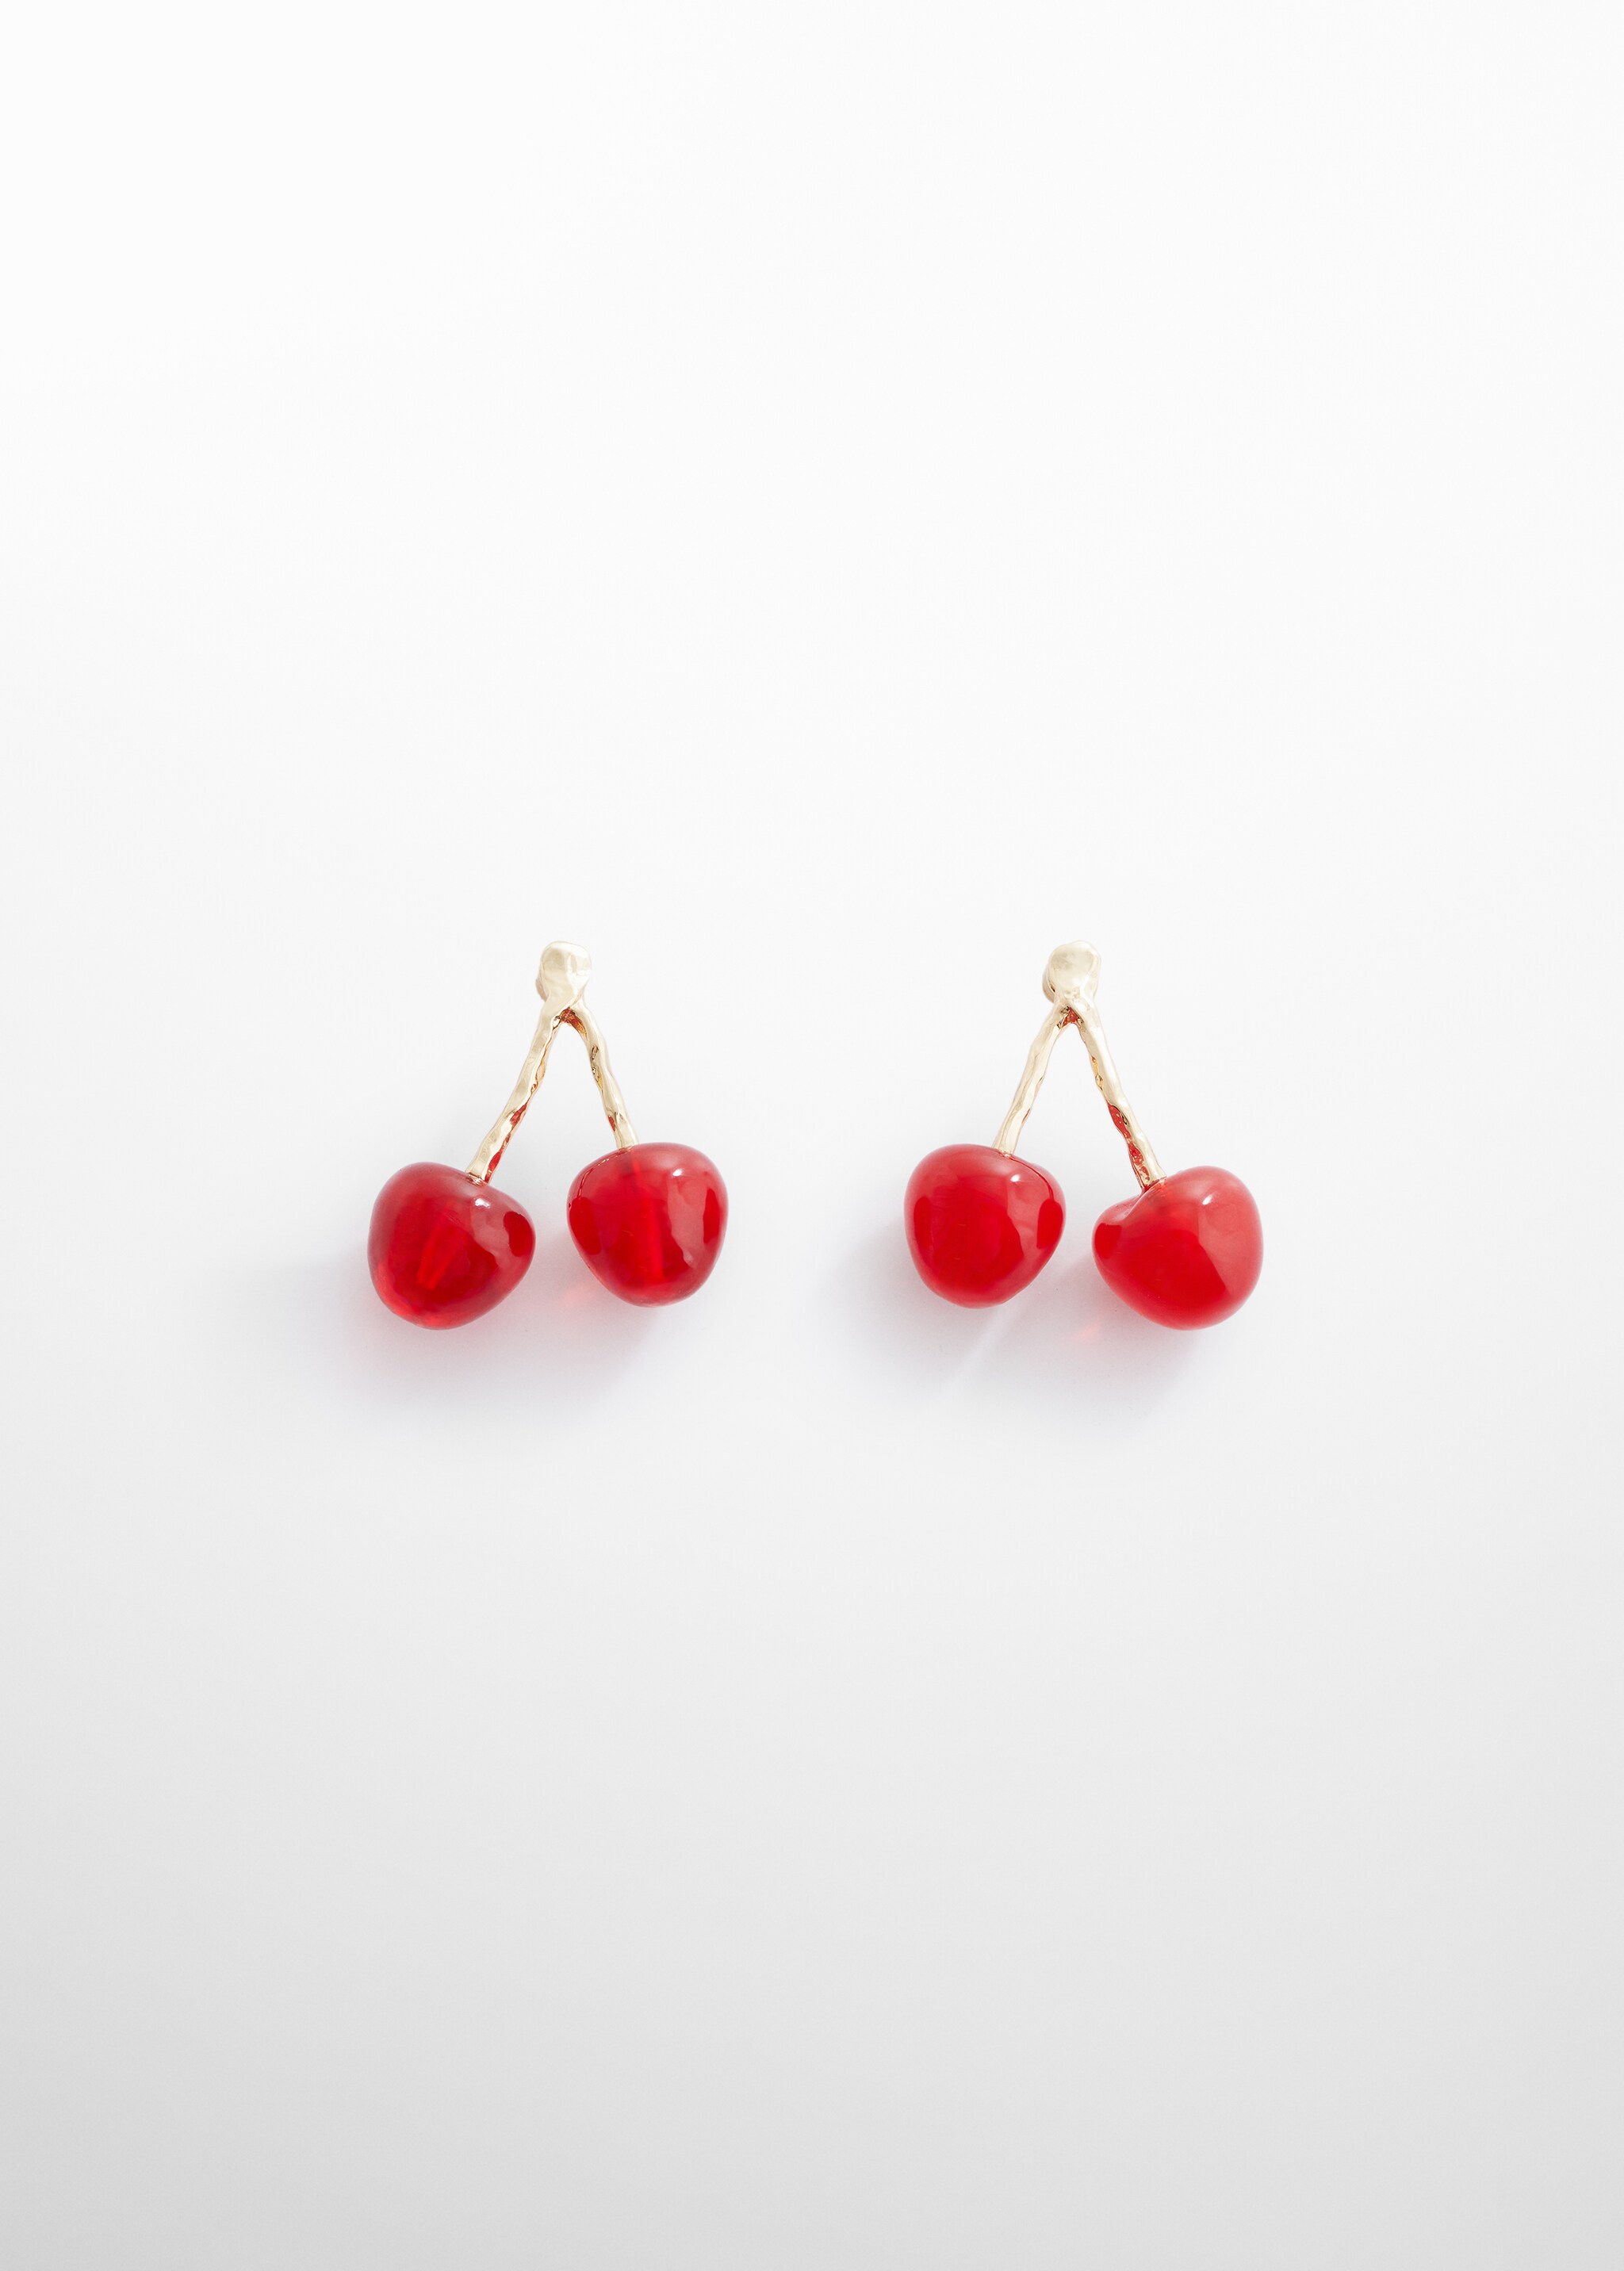 Cherry earrings - Article without model